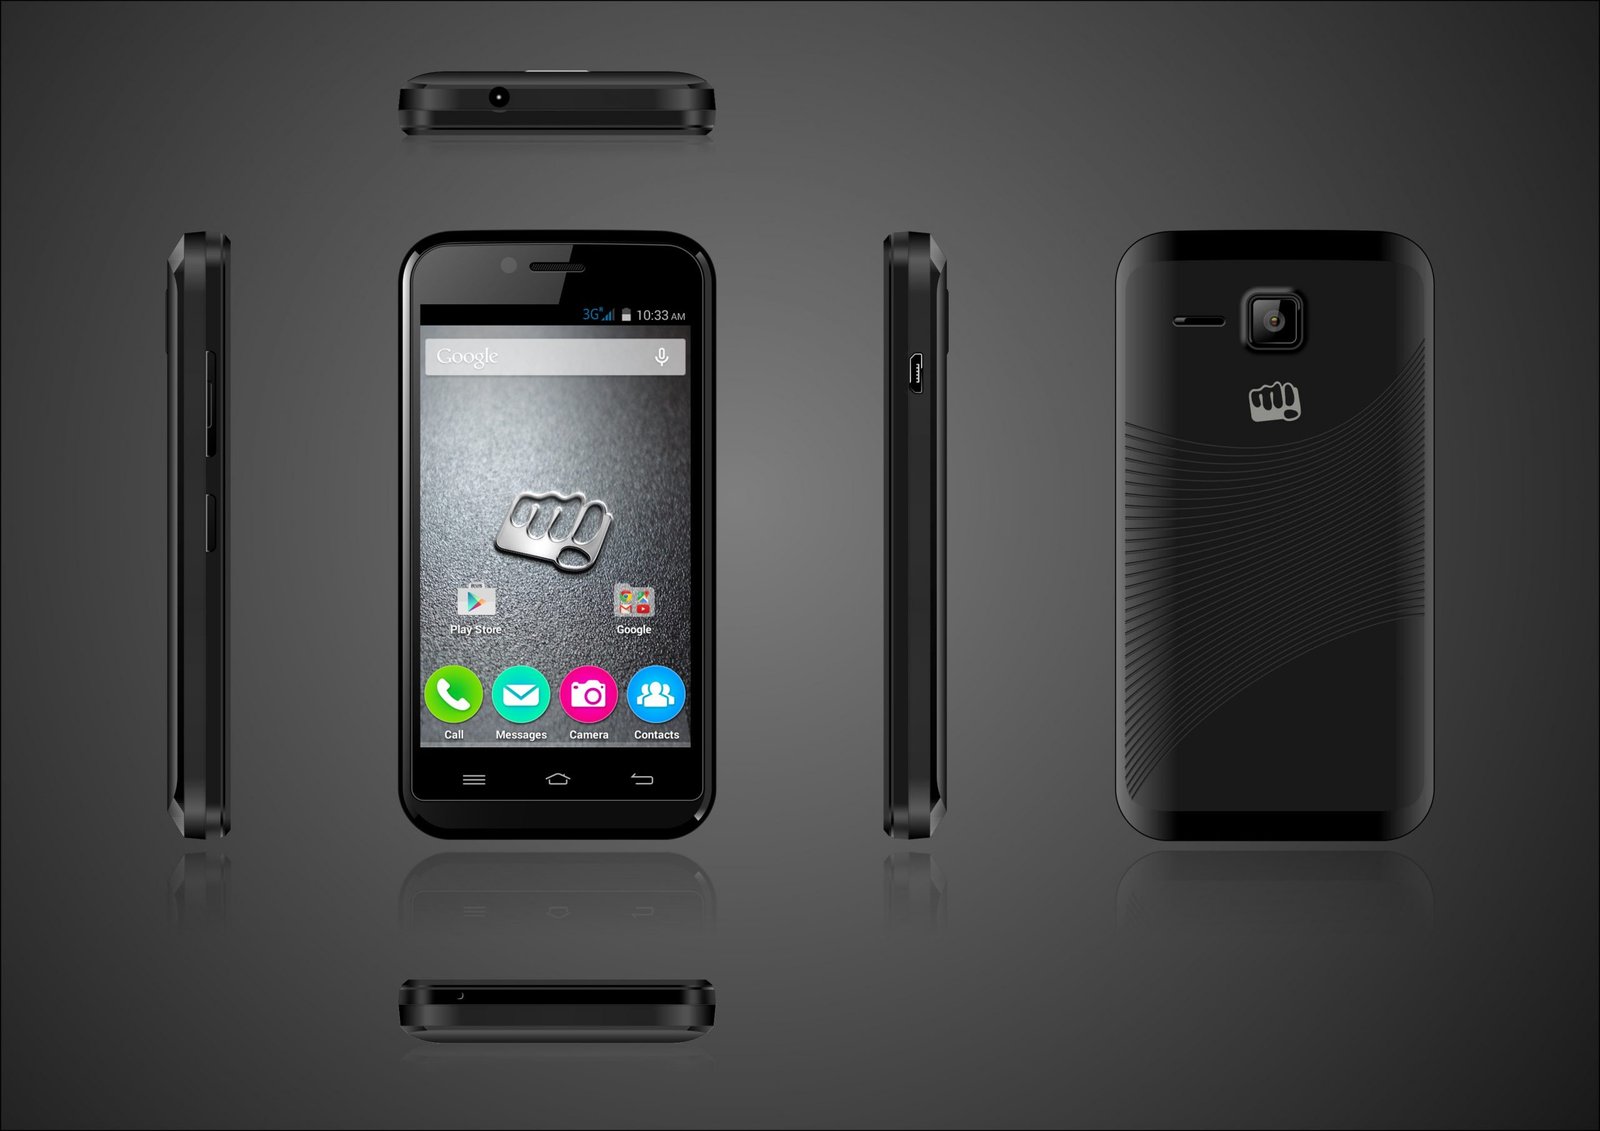 Micromax Bolt S301 goes on sale at Rs. 2899 in India